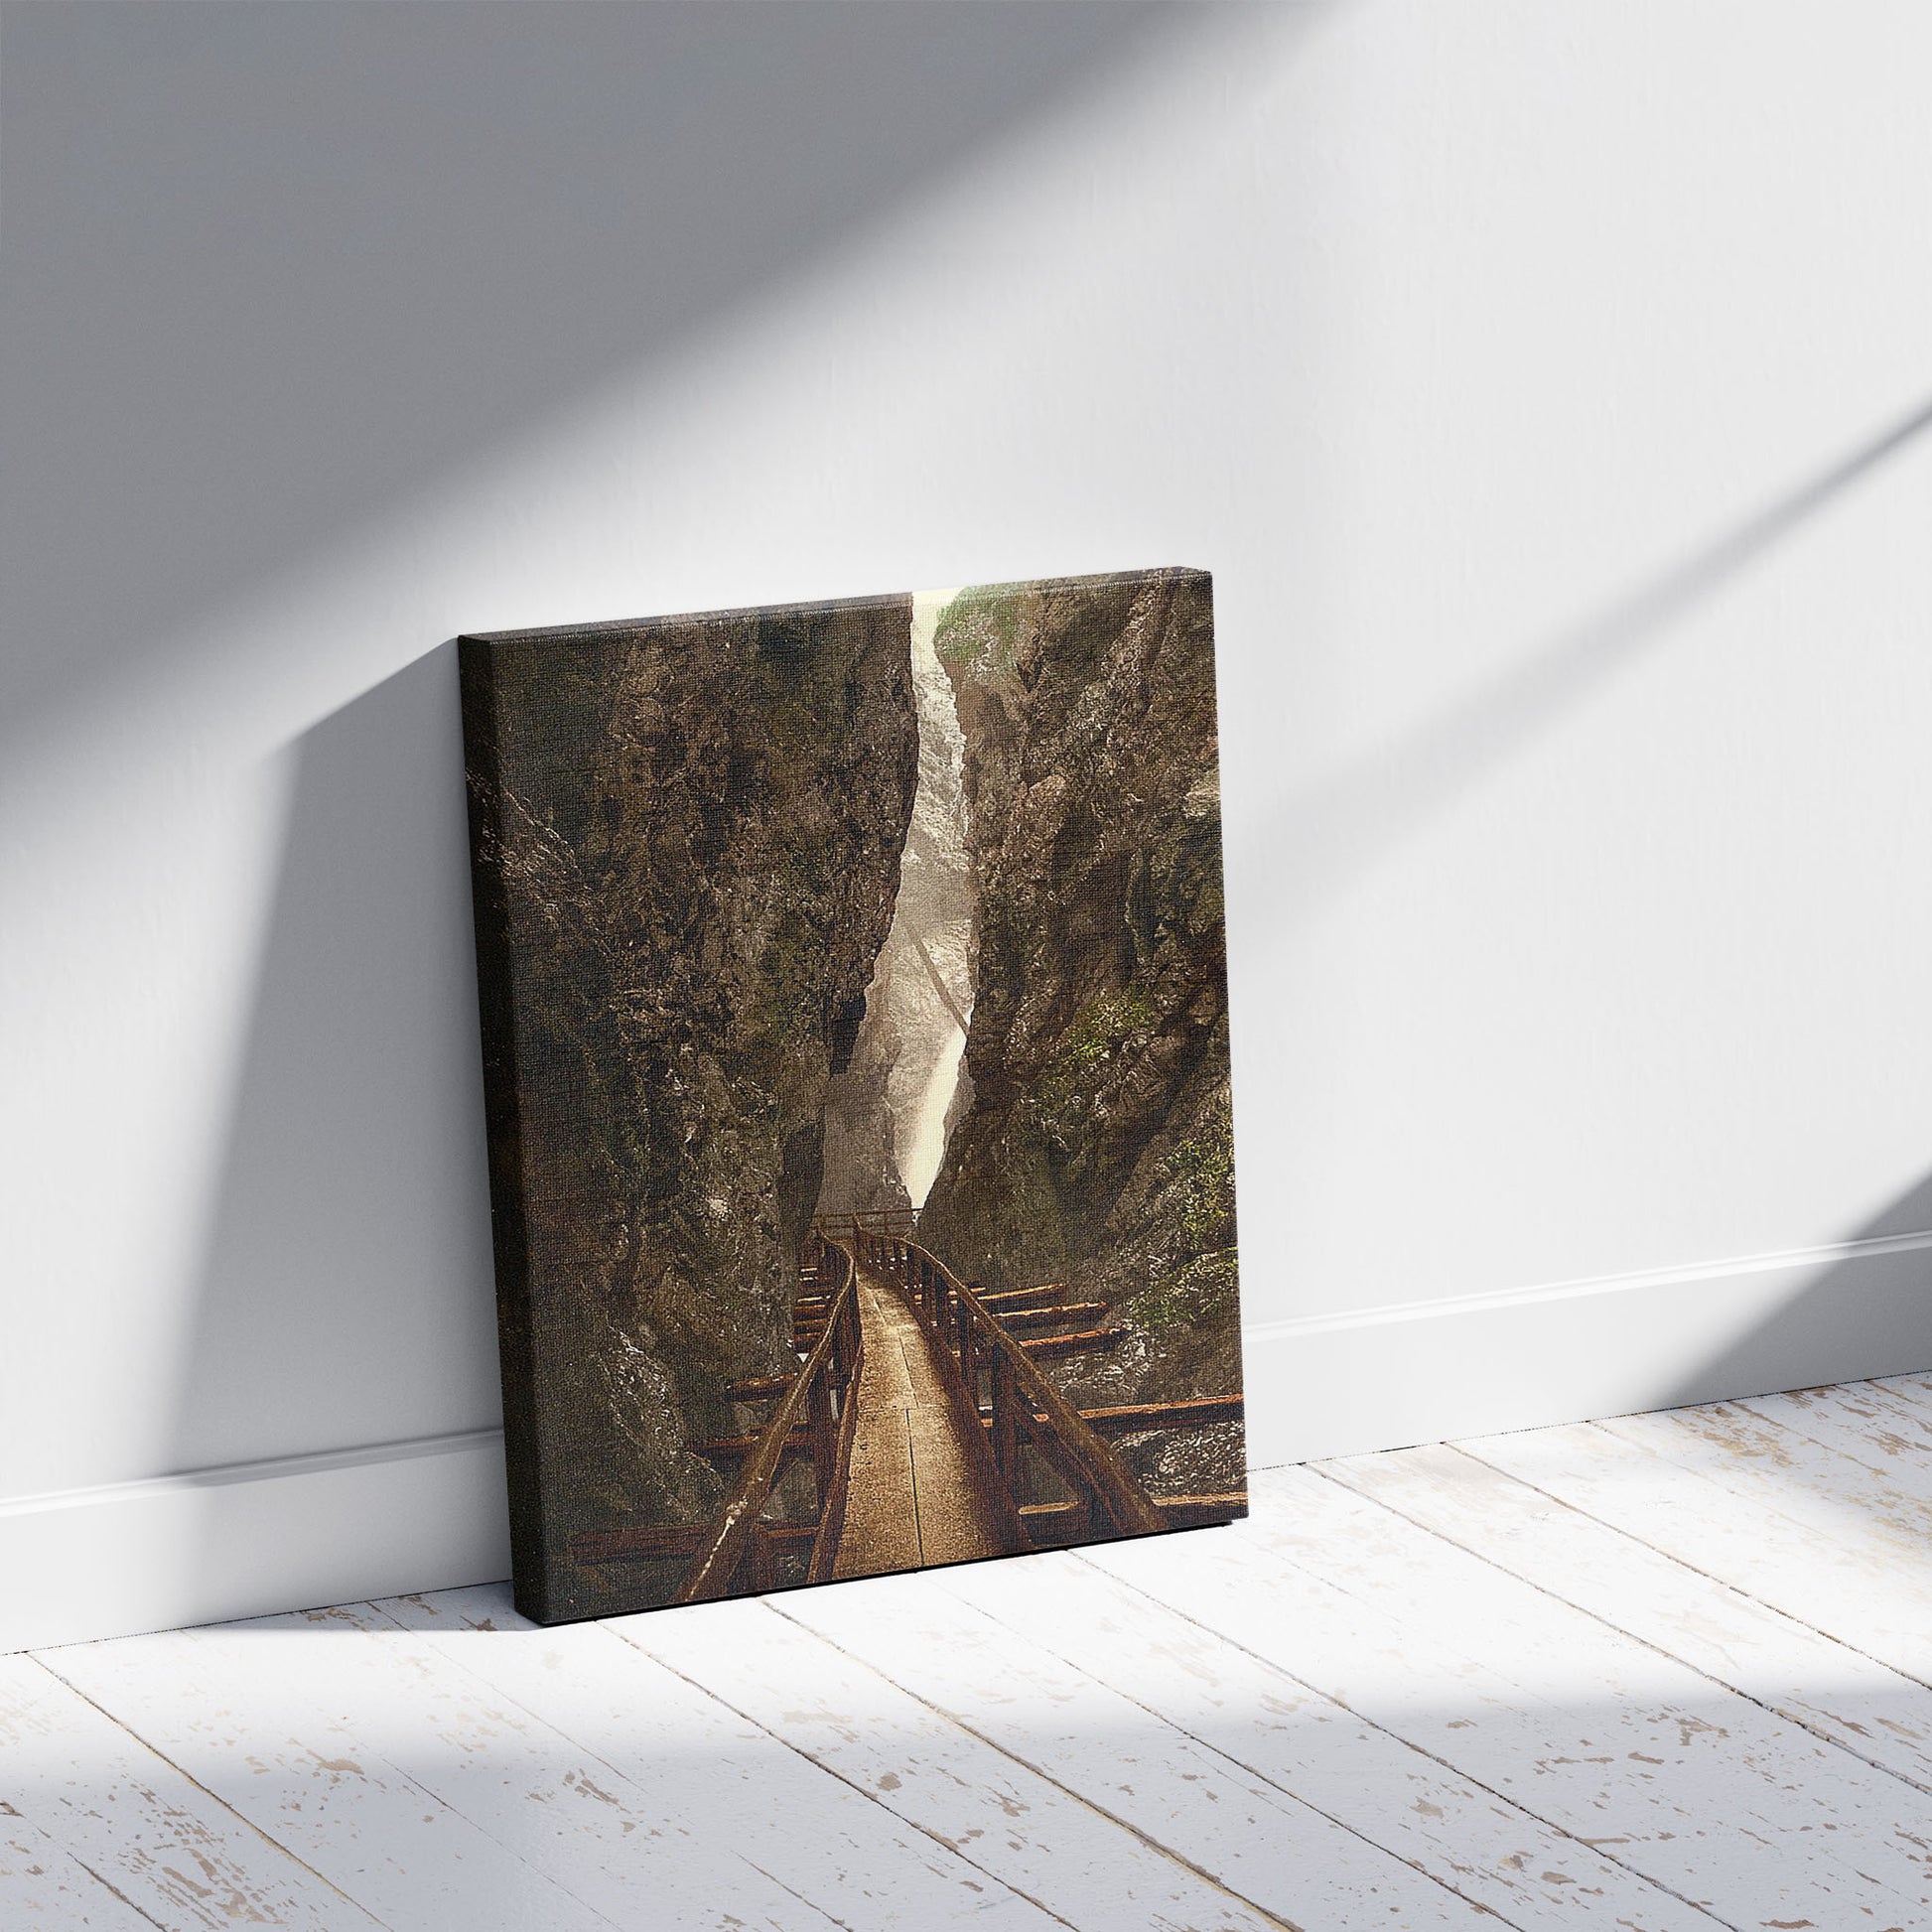 A picture of Leutaschklamm I, Upper Bavaria, Germany, a mockup of the print leaning against a wall